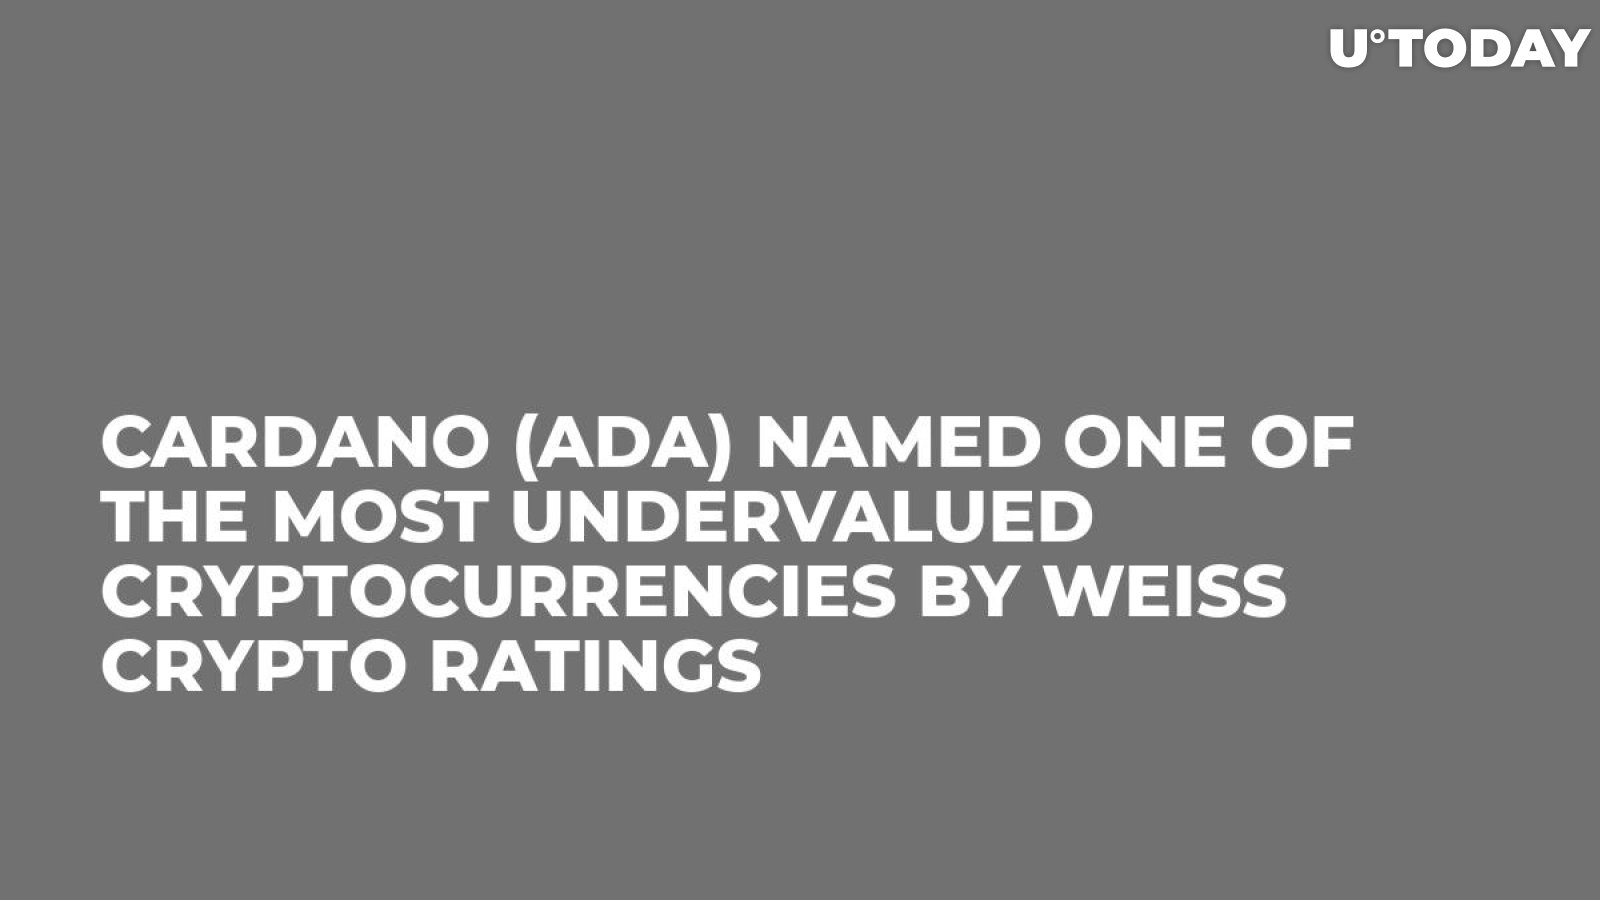 Cardano (ADA) Named One of the Most Undervalued Cryptocurrencies by Weiss Crypto Ratings